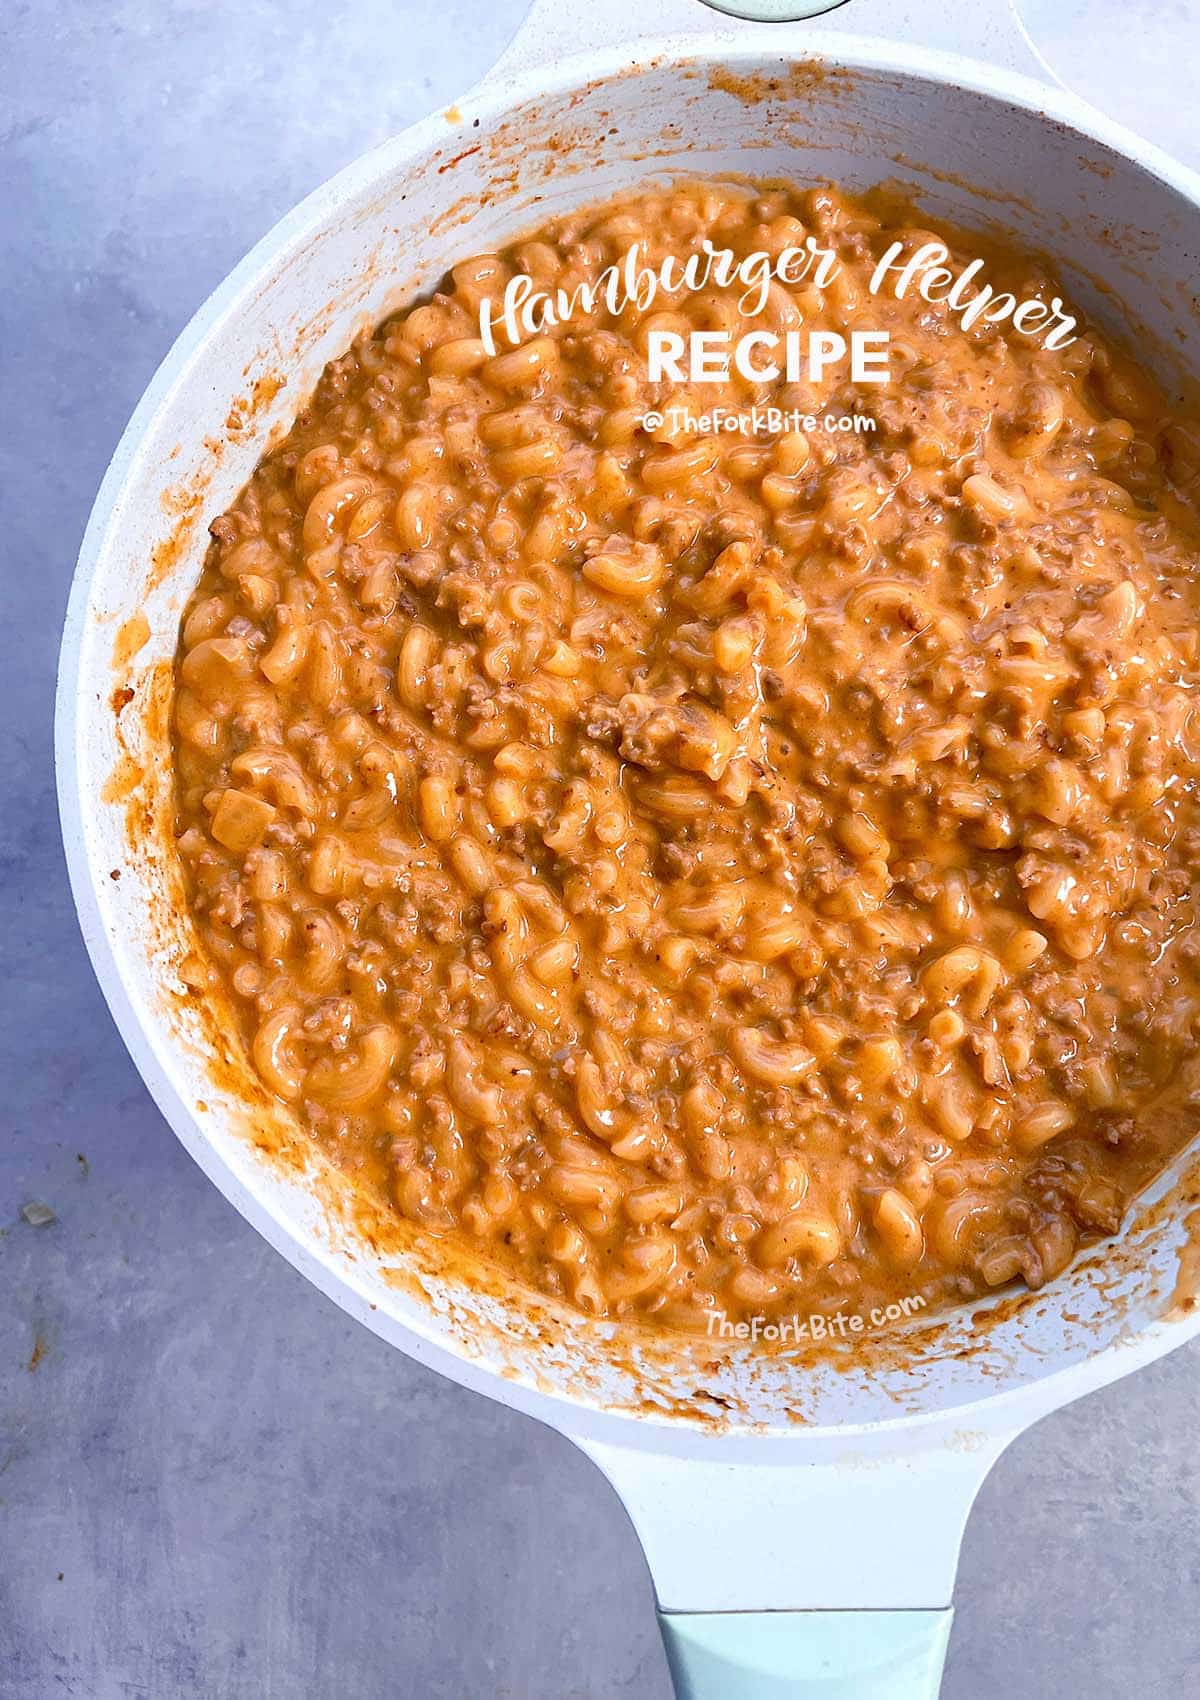 Making a flavorful and delicious hamburger helper is possible without cow’s milk. You can easily substitute it with other ingredients like water or broth.